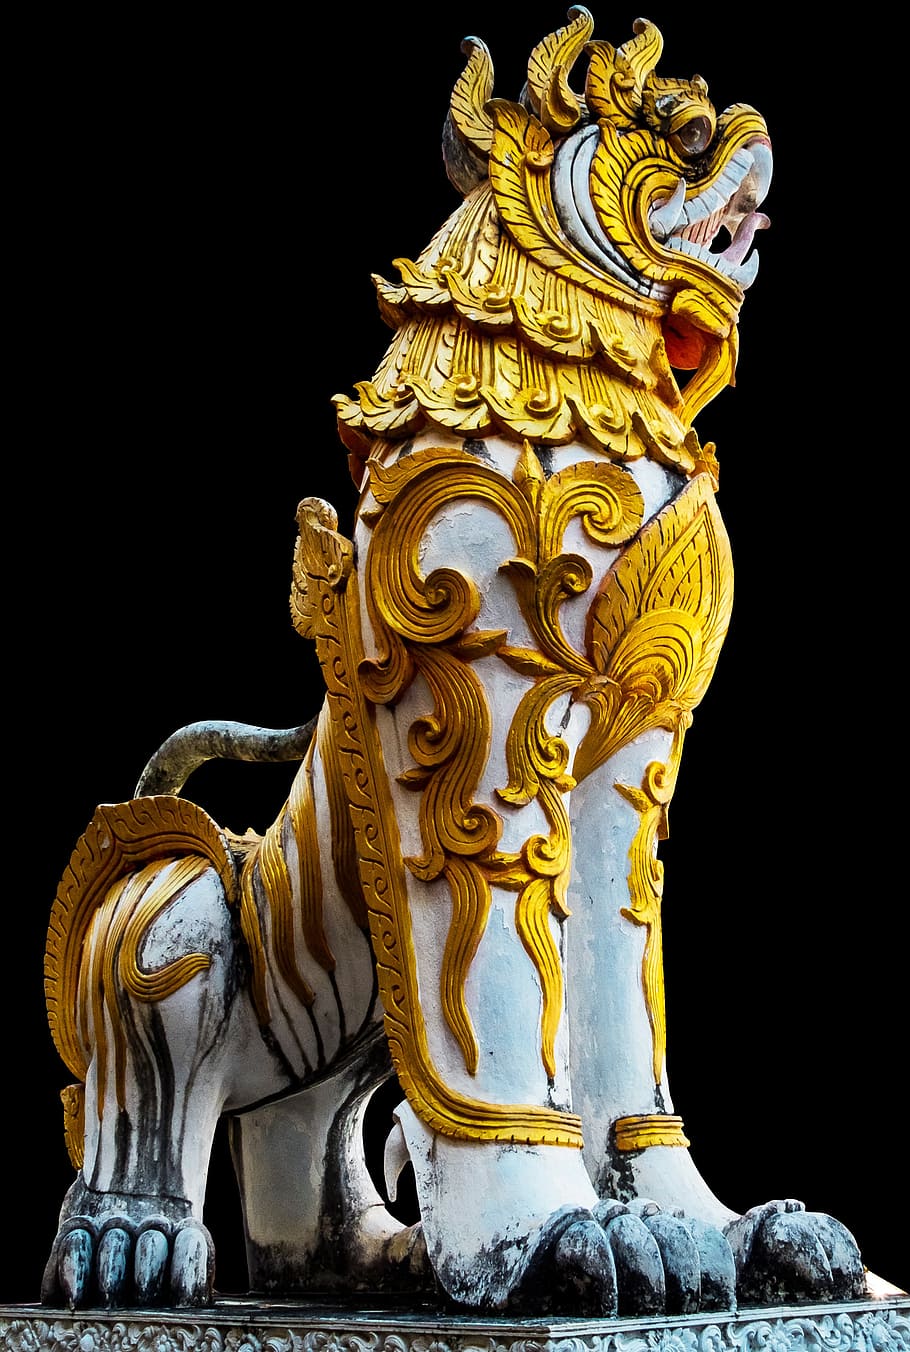 stone figure, statue, lion, isolated, thailand, asia, chinese, china, far east, gilded